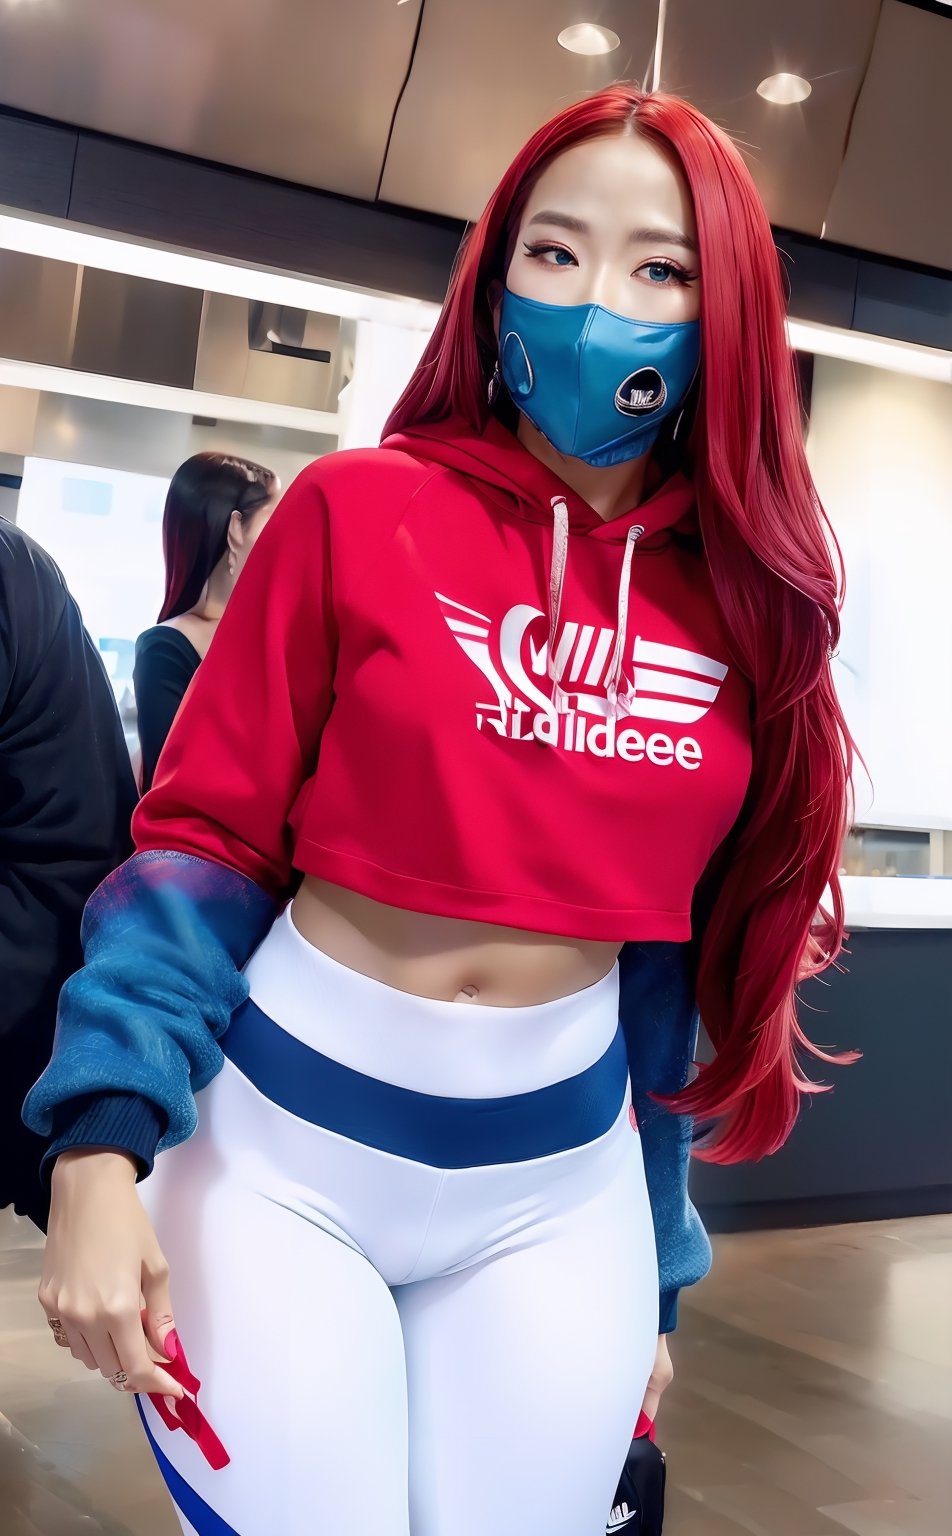 masterpiece , best quuality, 1 girl, delicate, masterpiece, beautiful detailed, long red hair , random colorful, finely detailed, detailed lips, intricate details, shiny skin, big breasts, Korean girl with long red hair and blue eyes Wear a white Adidas cropped long-sleeved hoodie. Red Nike tight pants white nike shoes Standing in a Nike store,Young beauty spirit ,face JeeSoo,wonder beauty 